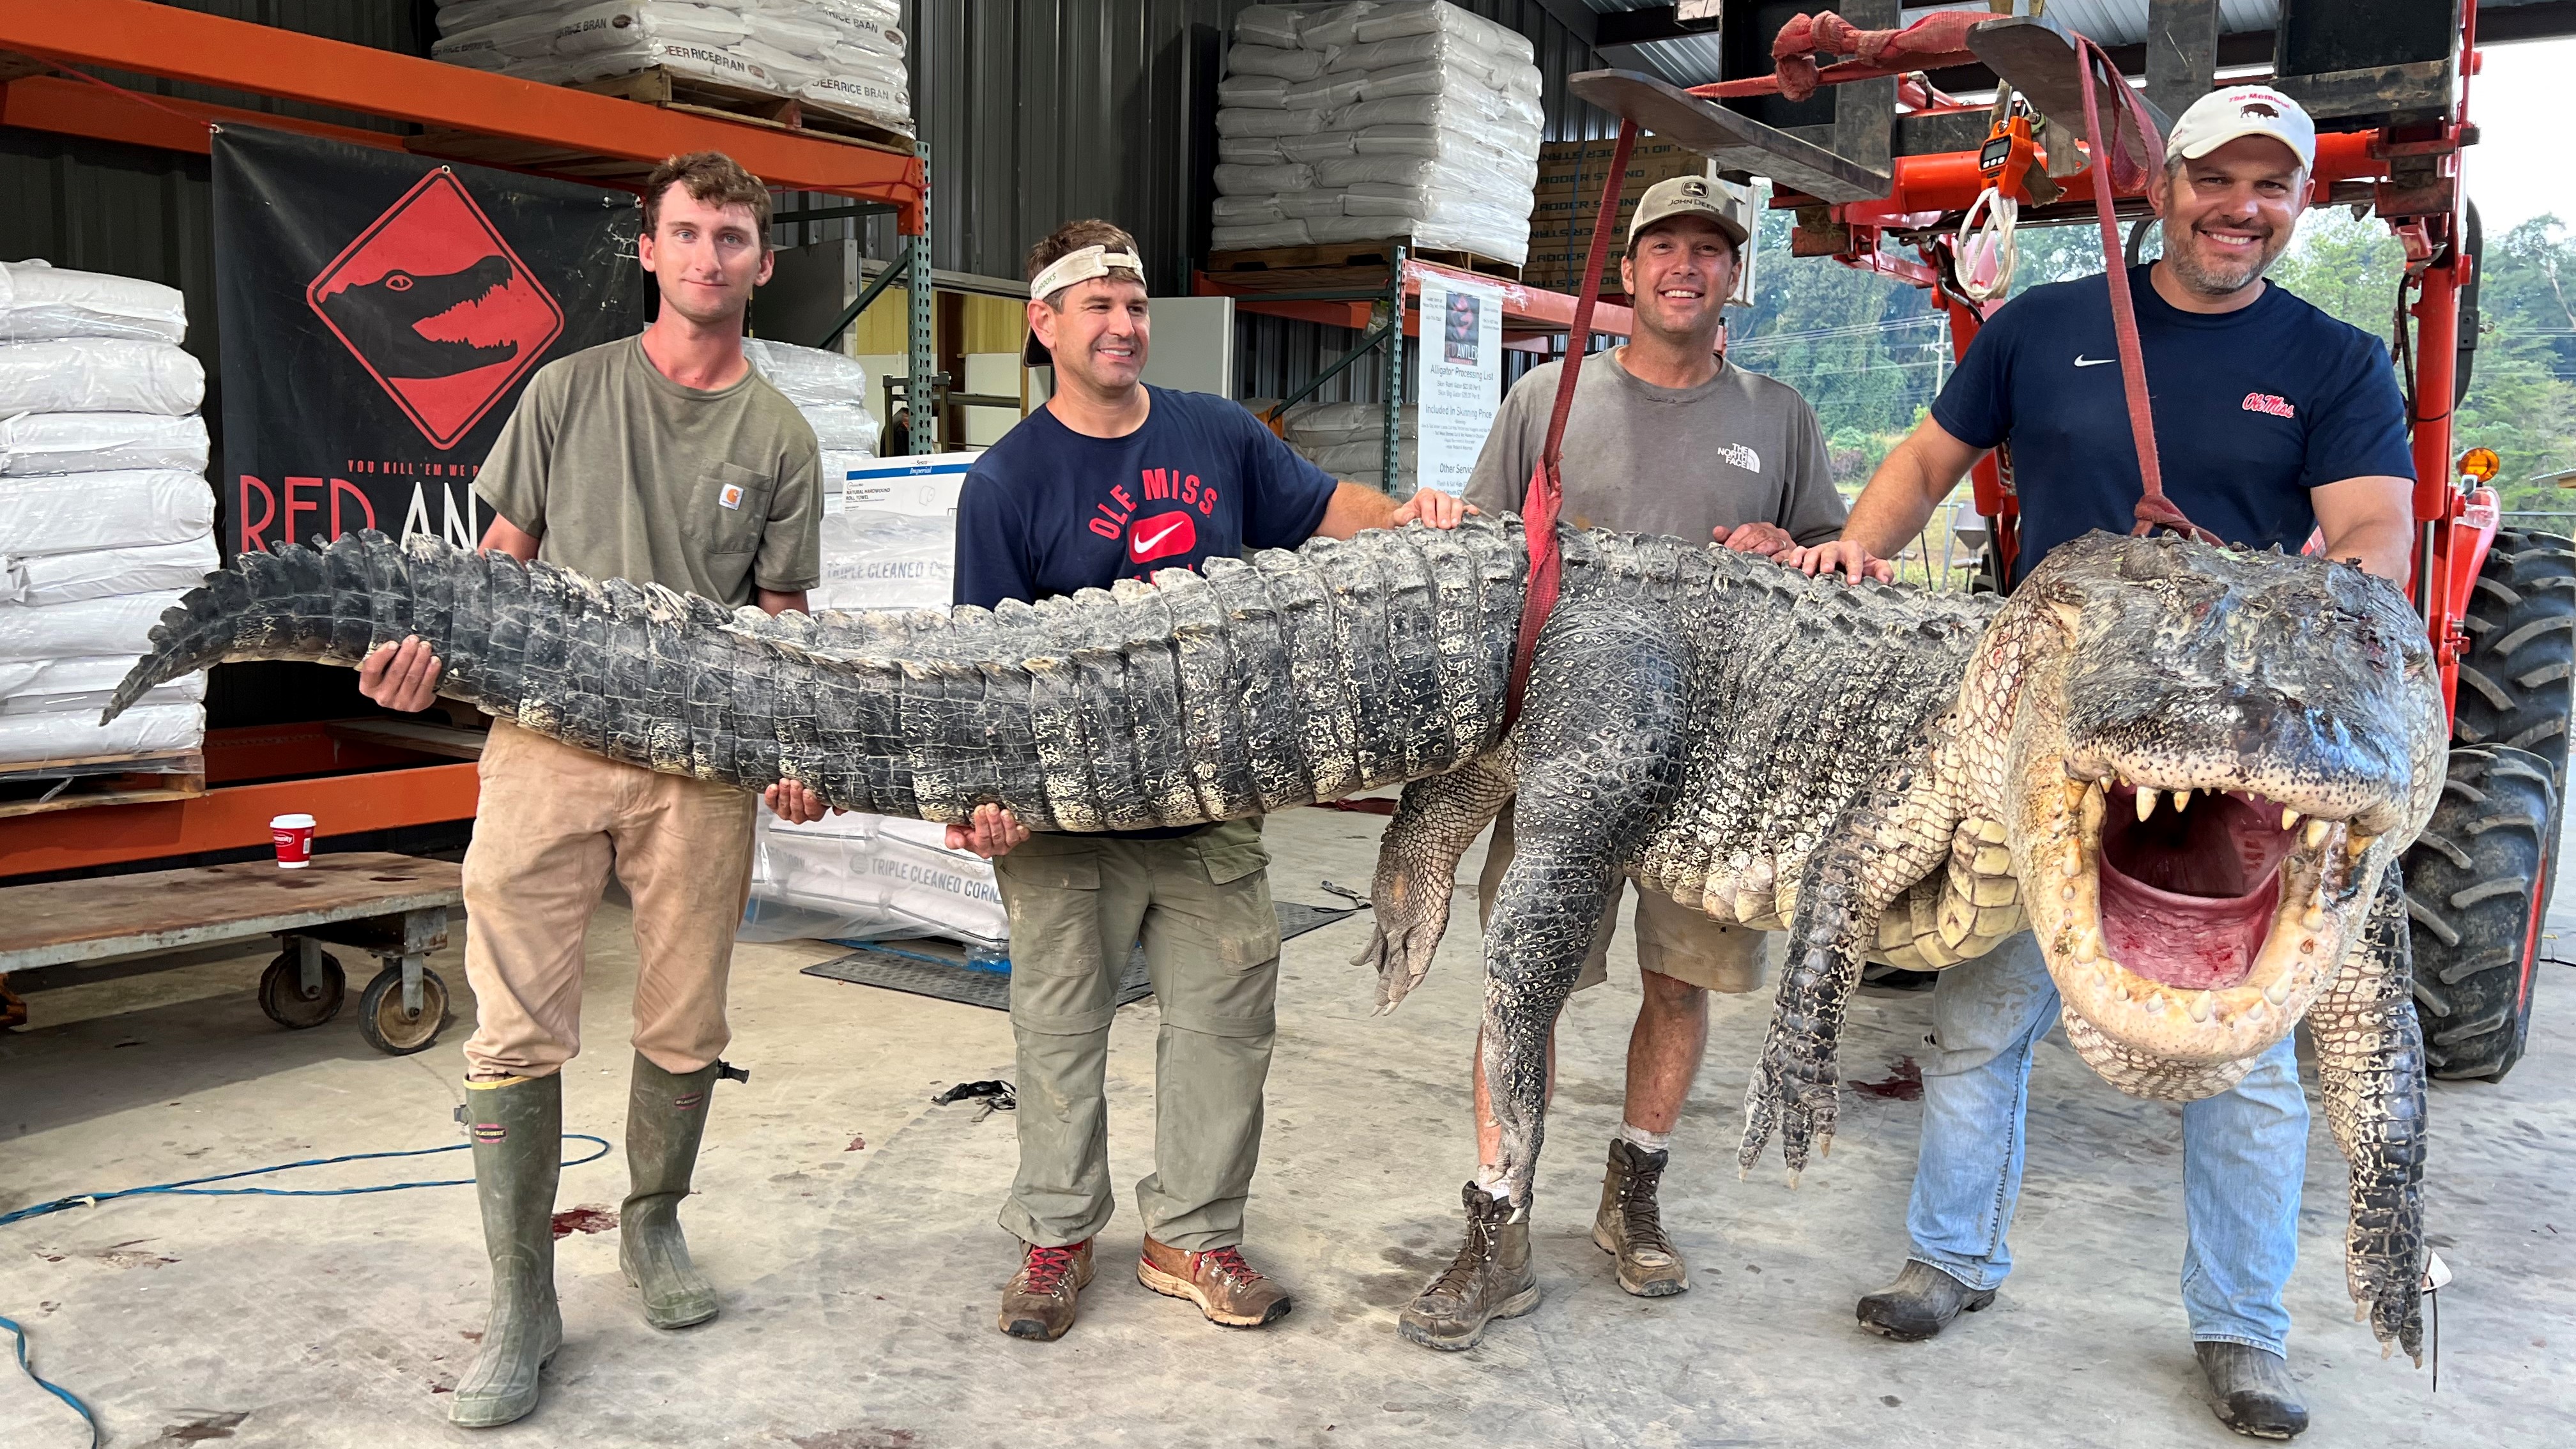 worlds largest crocodile ever caught